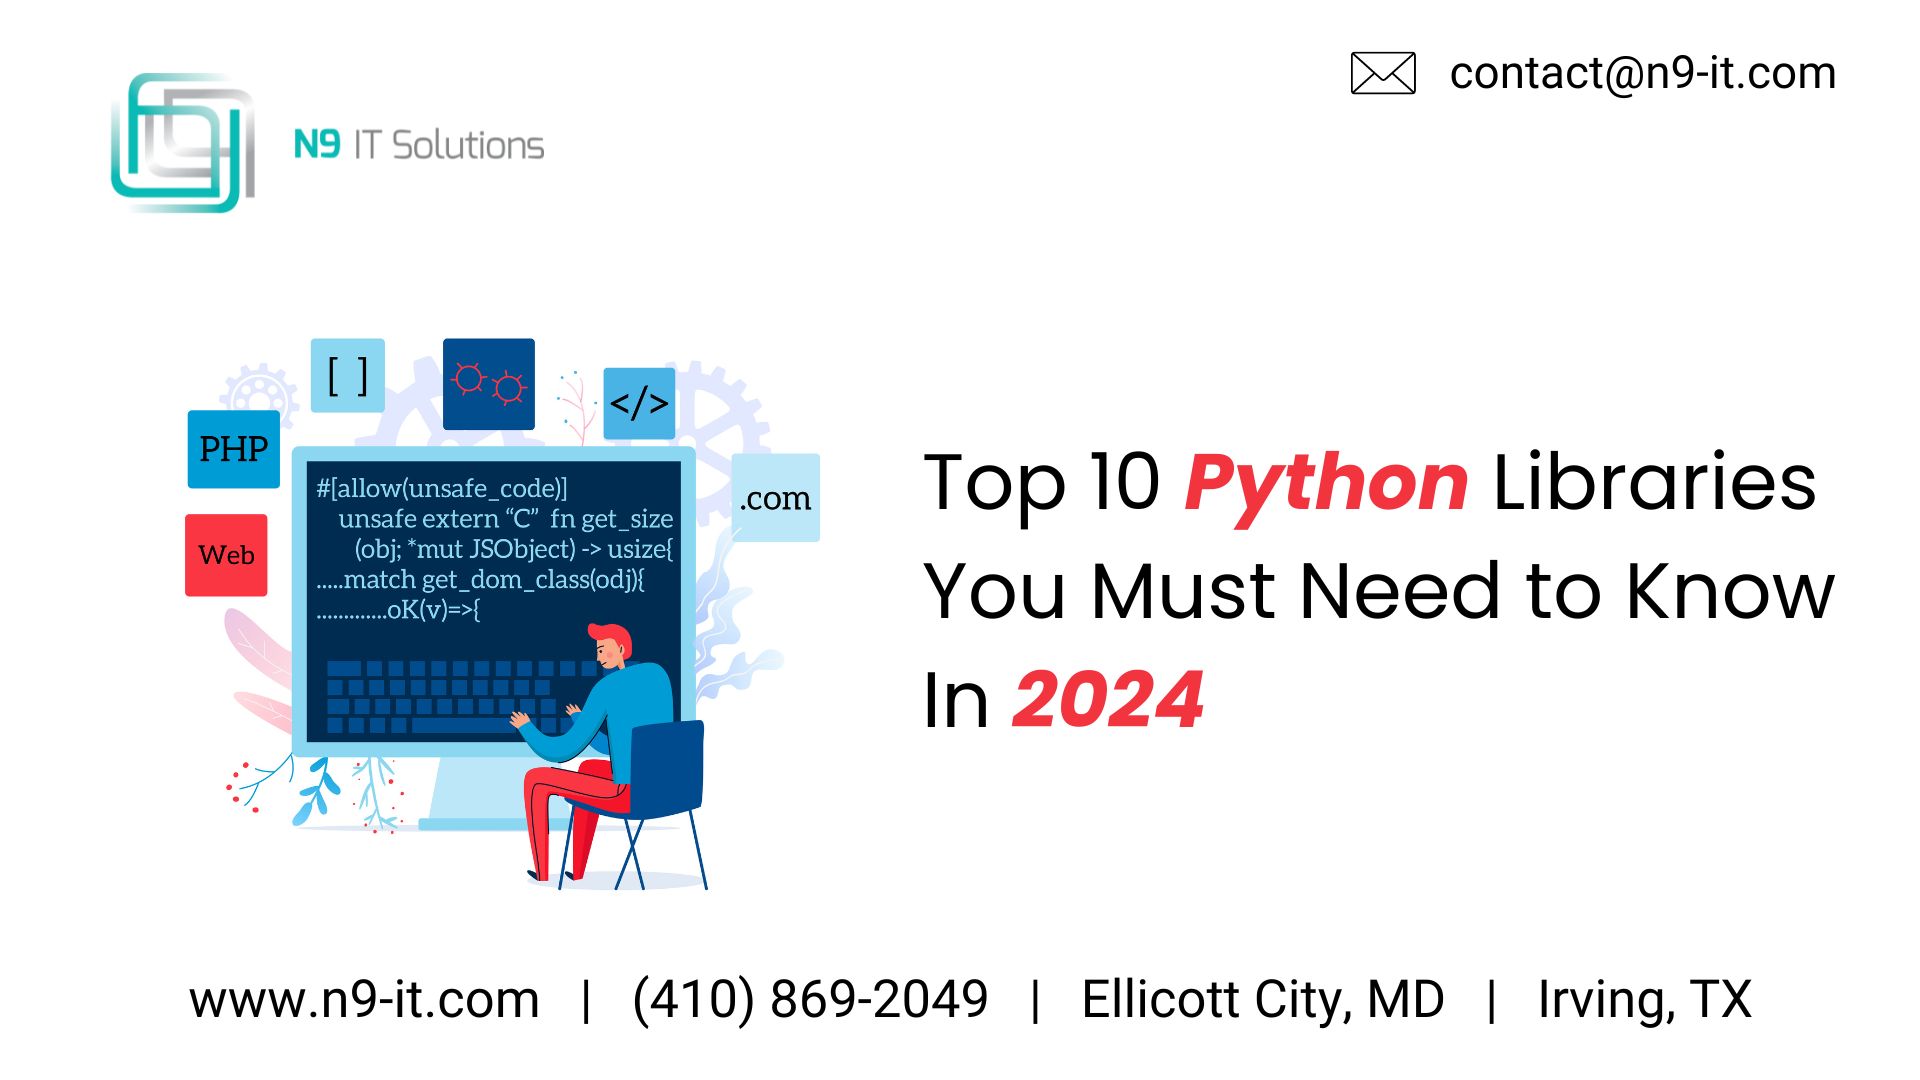 Top 10 Python Libraries You Must Need to Know In 2024